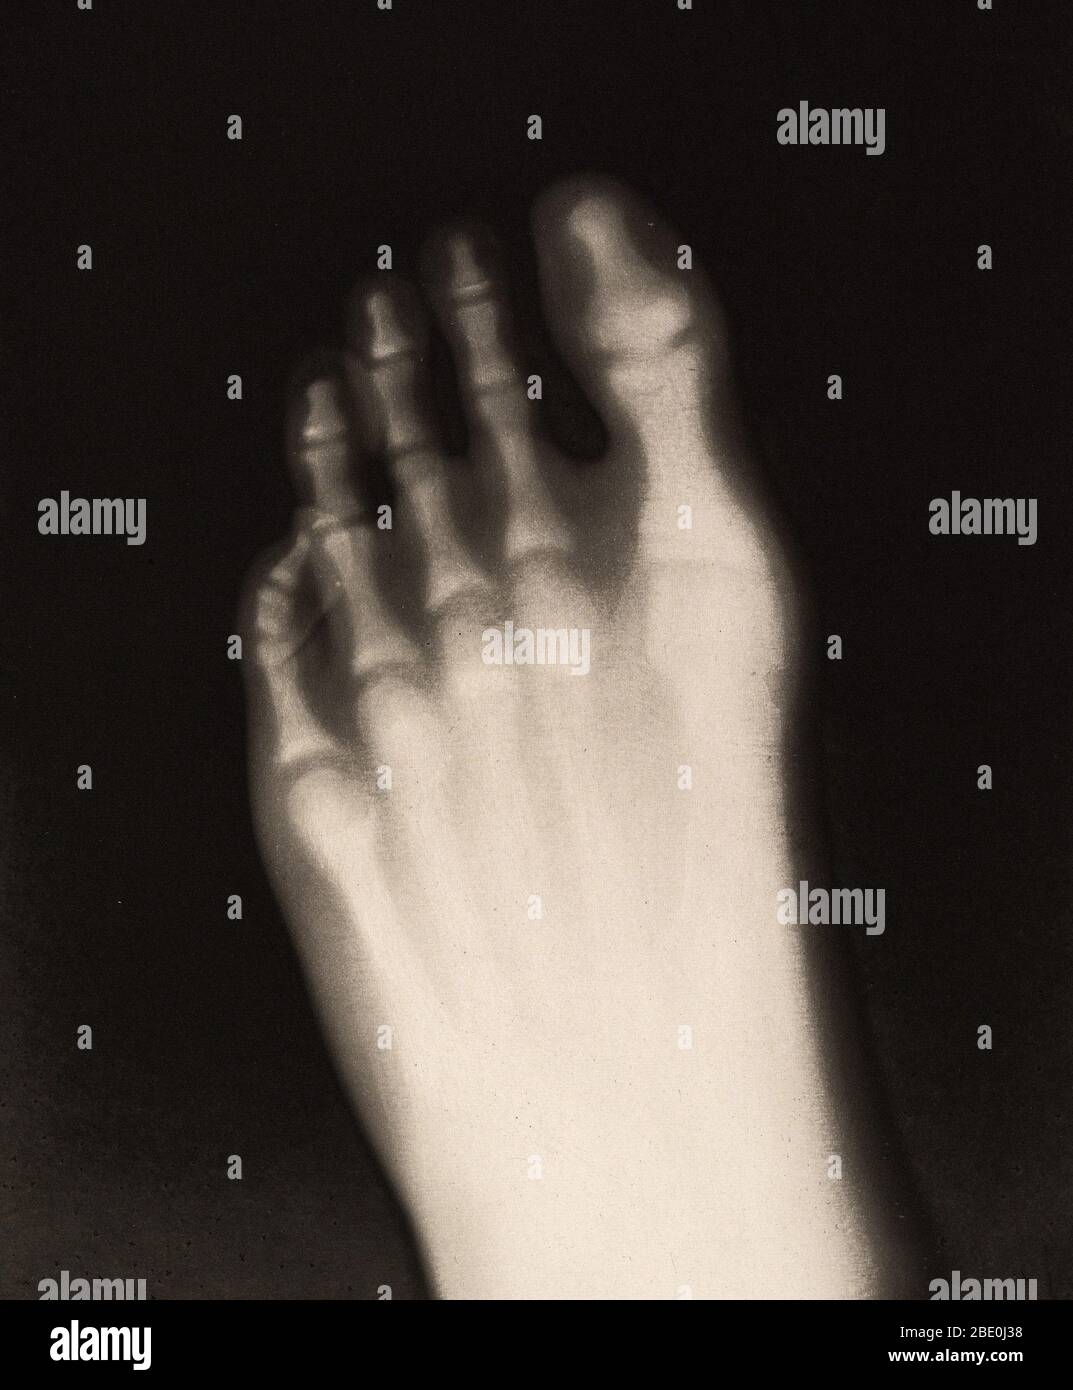 Historical X-ray of the foot of a 17-year-old boy, 1896. Taken by Josef Maria Eder (Austrian, 1855-1944) and Eduard Valenta (Austrian, 1857-1937). Photogravure. Eder was the director of an institute for graphic processes and the author of an early history of photography. With the photochemist Valenta, he produced a portfolio in January 1896, less than a month after Wilhelm Conrad Rontgen published his discovery of X-rays. Eder and Valenta's volume, from which this plate derives, demonstrated the X-ray's magical ability to reveal the hidden structure of living things. Human hands and feet, fish Stock Photo